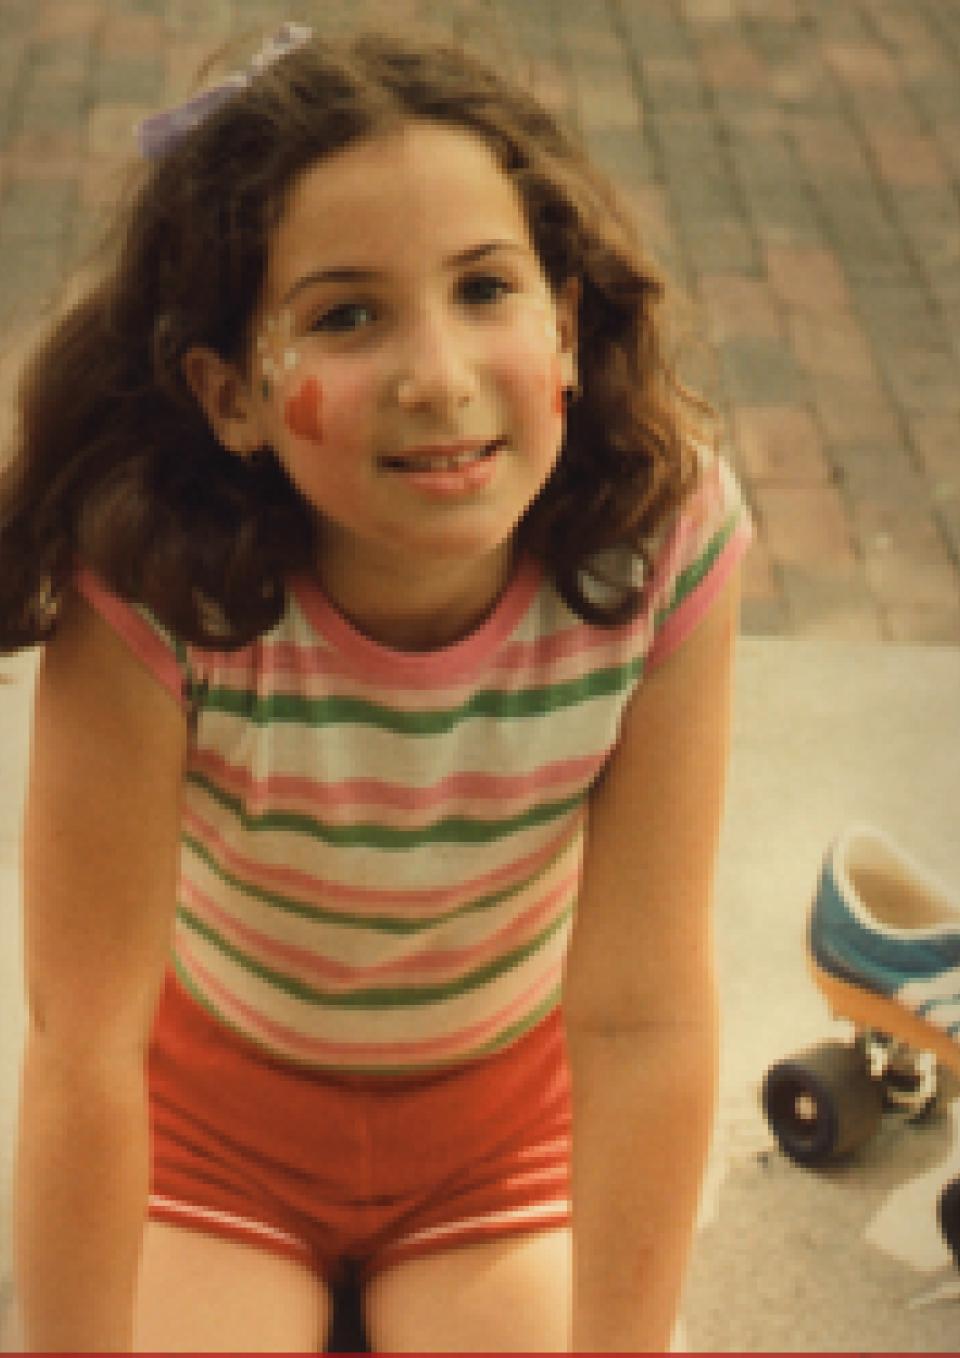 A girl of about ten years old, likely in the early eighties, wearing a shirt with rainbow stripes and red shorts, sitting next to a blue Adidas roller skate with a yellow sole and big black wheels. She has facepaint on her cheeks.